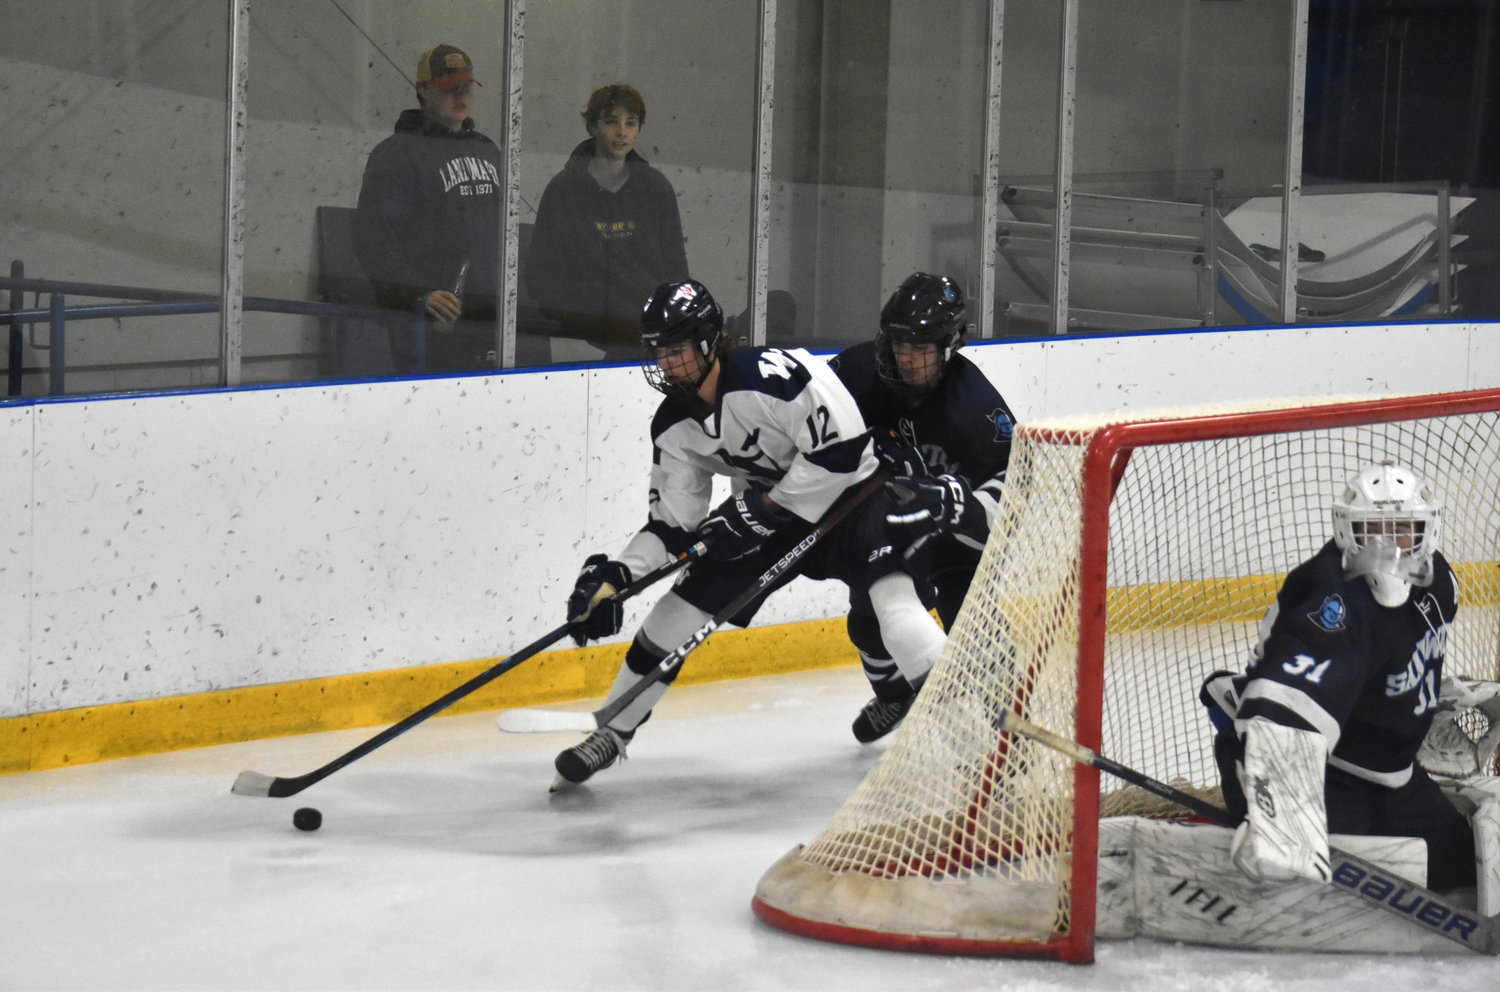 Ryan Davis works the puck around the net during the Whalers' 3-1 loss Wednesday at home against Sandwich. The junior scored his first goal of the season in the game.